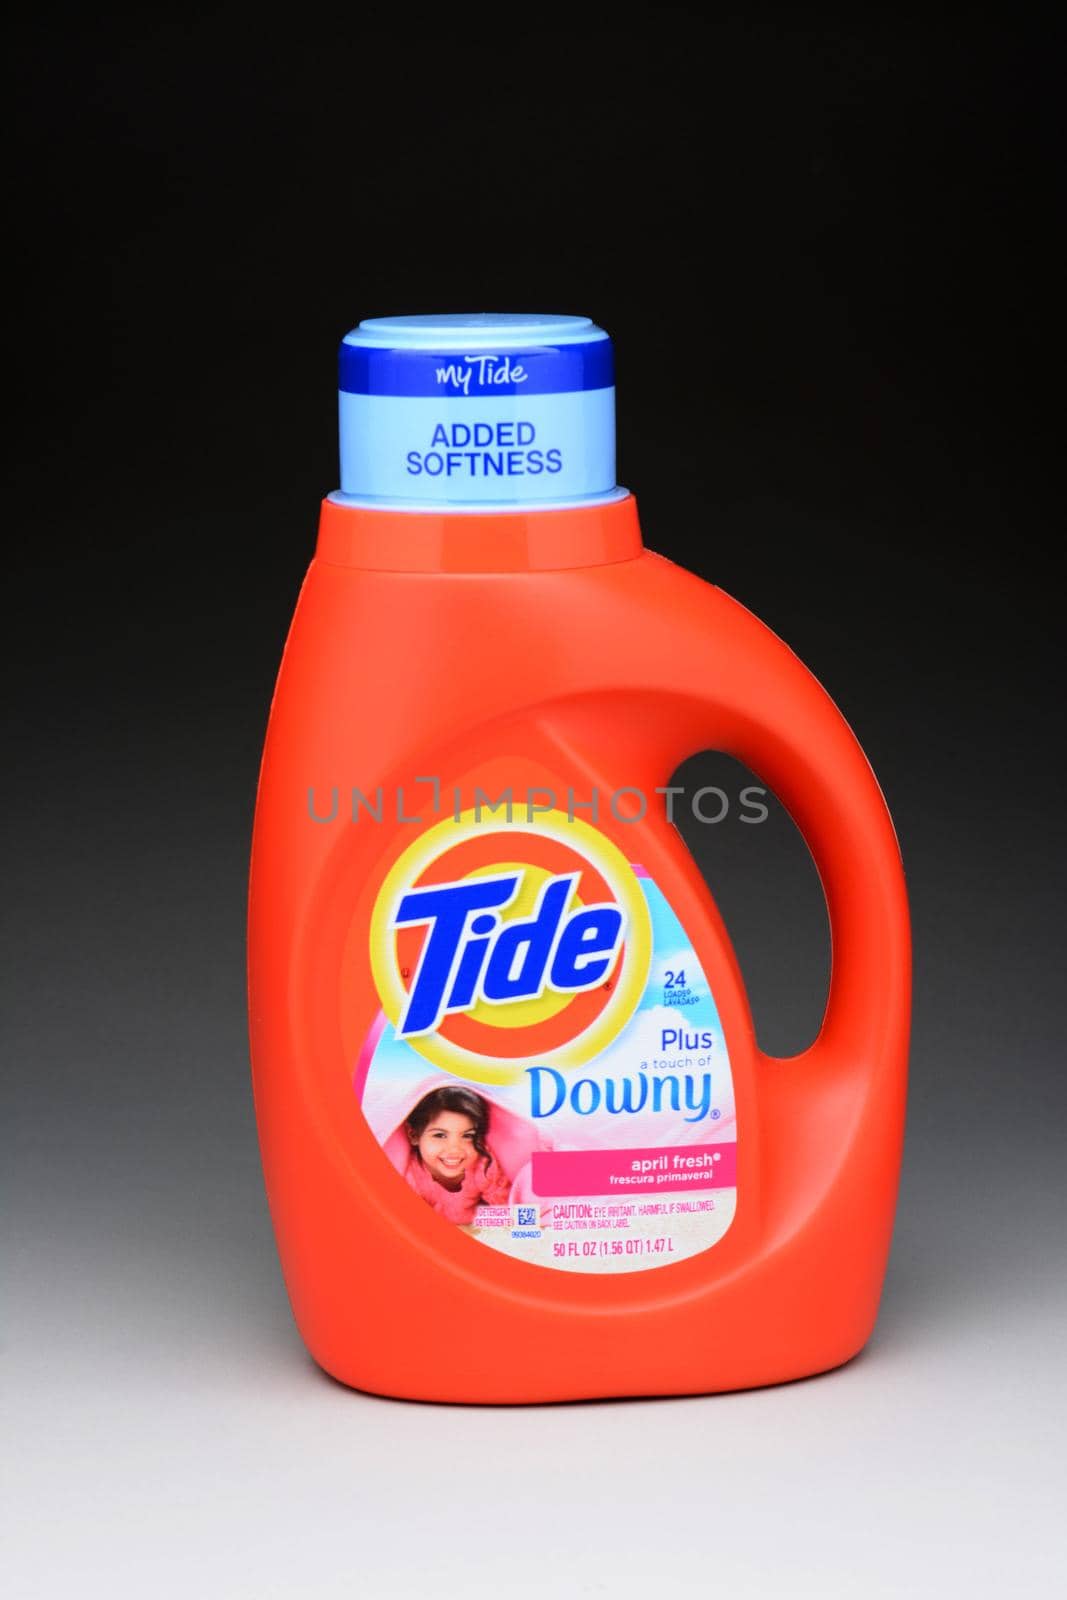 IRVINE, CA - January 11, 2013: A 50 ounce bottle of Tide Plus Downey Laundry Detergent. Tide has more than 30% of the liquid-detergent market, with more than twice as much in sales as the second most-popular brand.